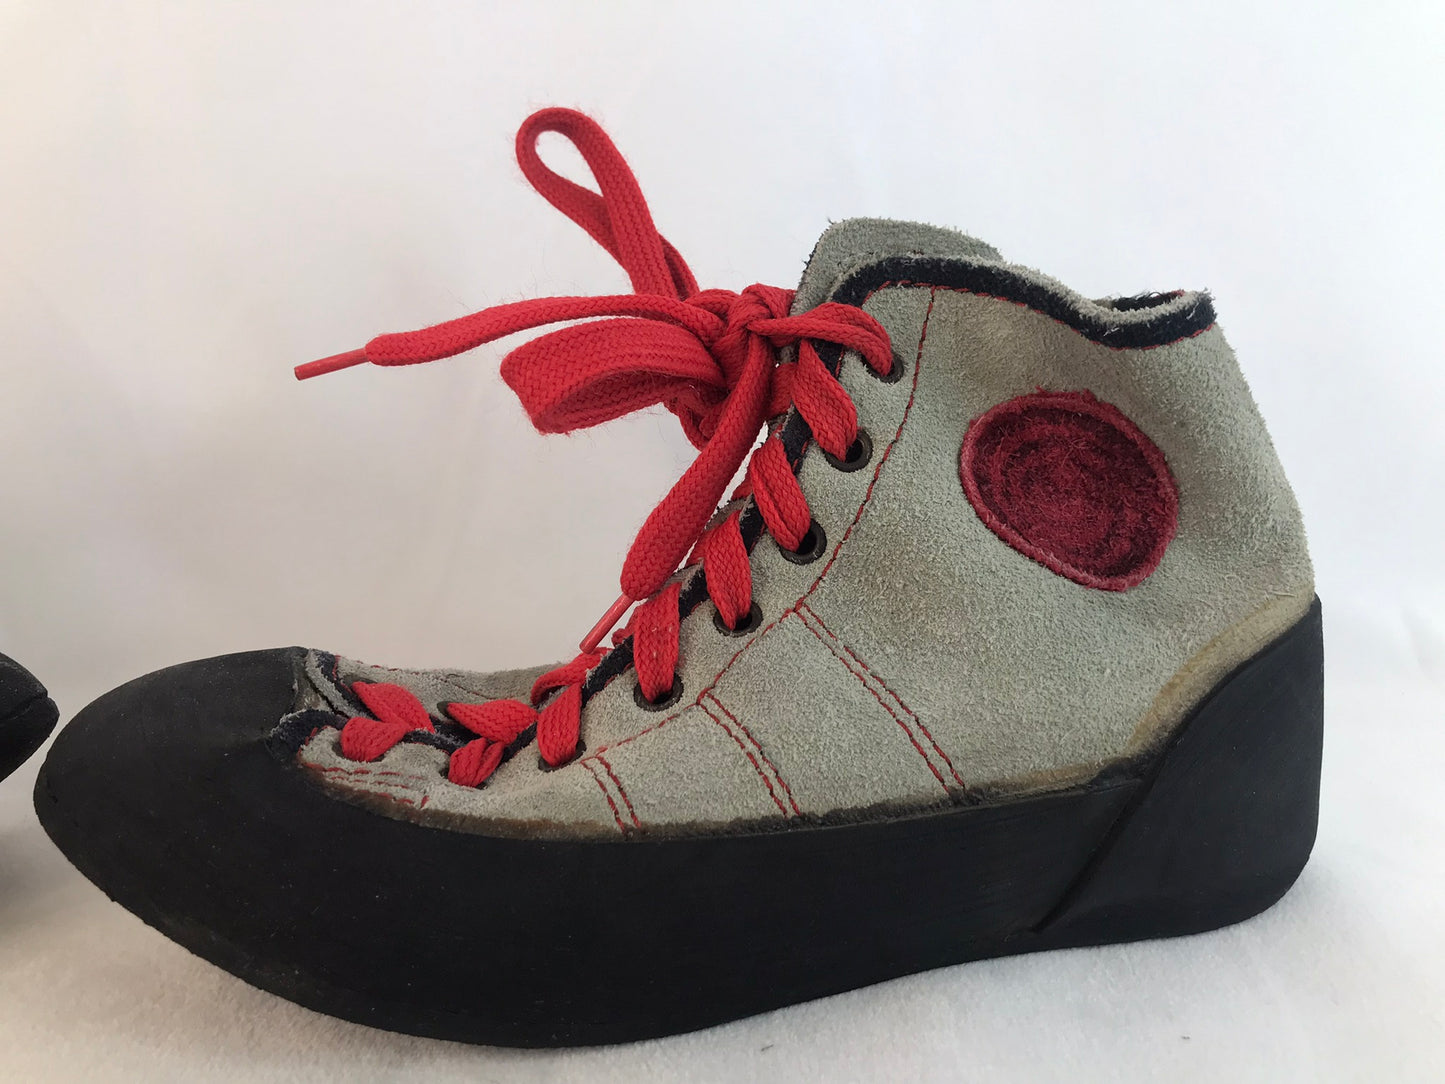 Rock Climbinging Shoes  Men's Size 5 Boreal Spain Leather Suade Black Red Excellent Quality